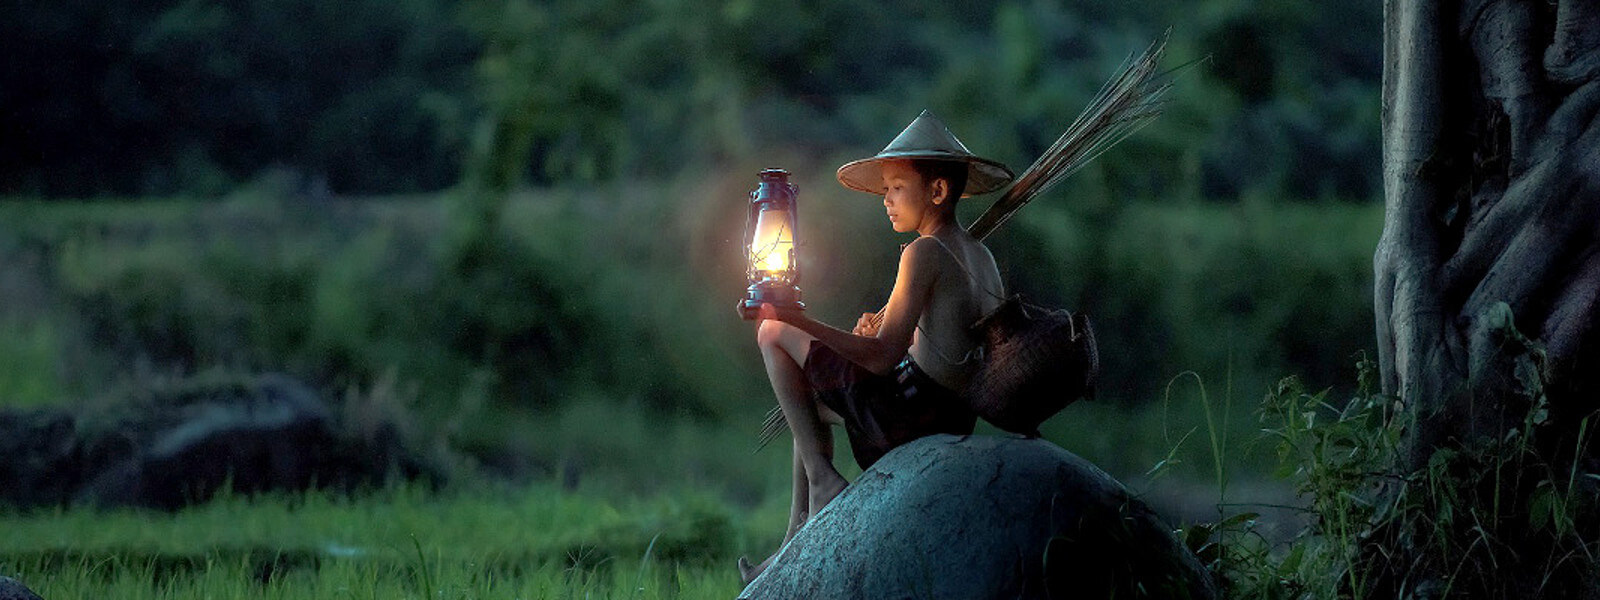 Thai boy sits on a rock, holding an oil lamp.